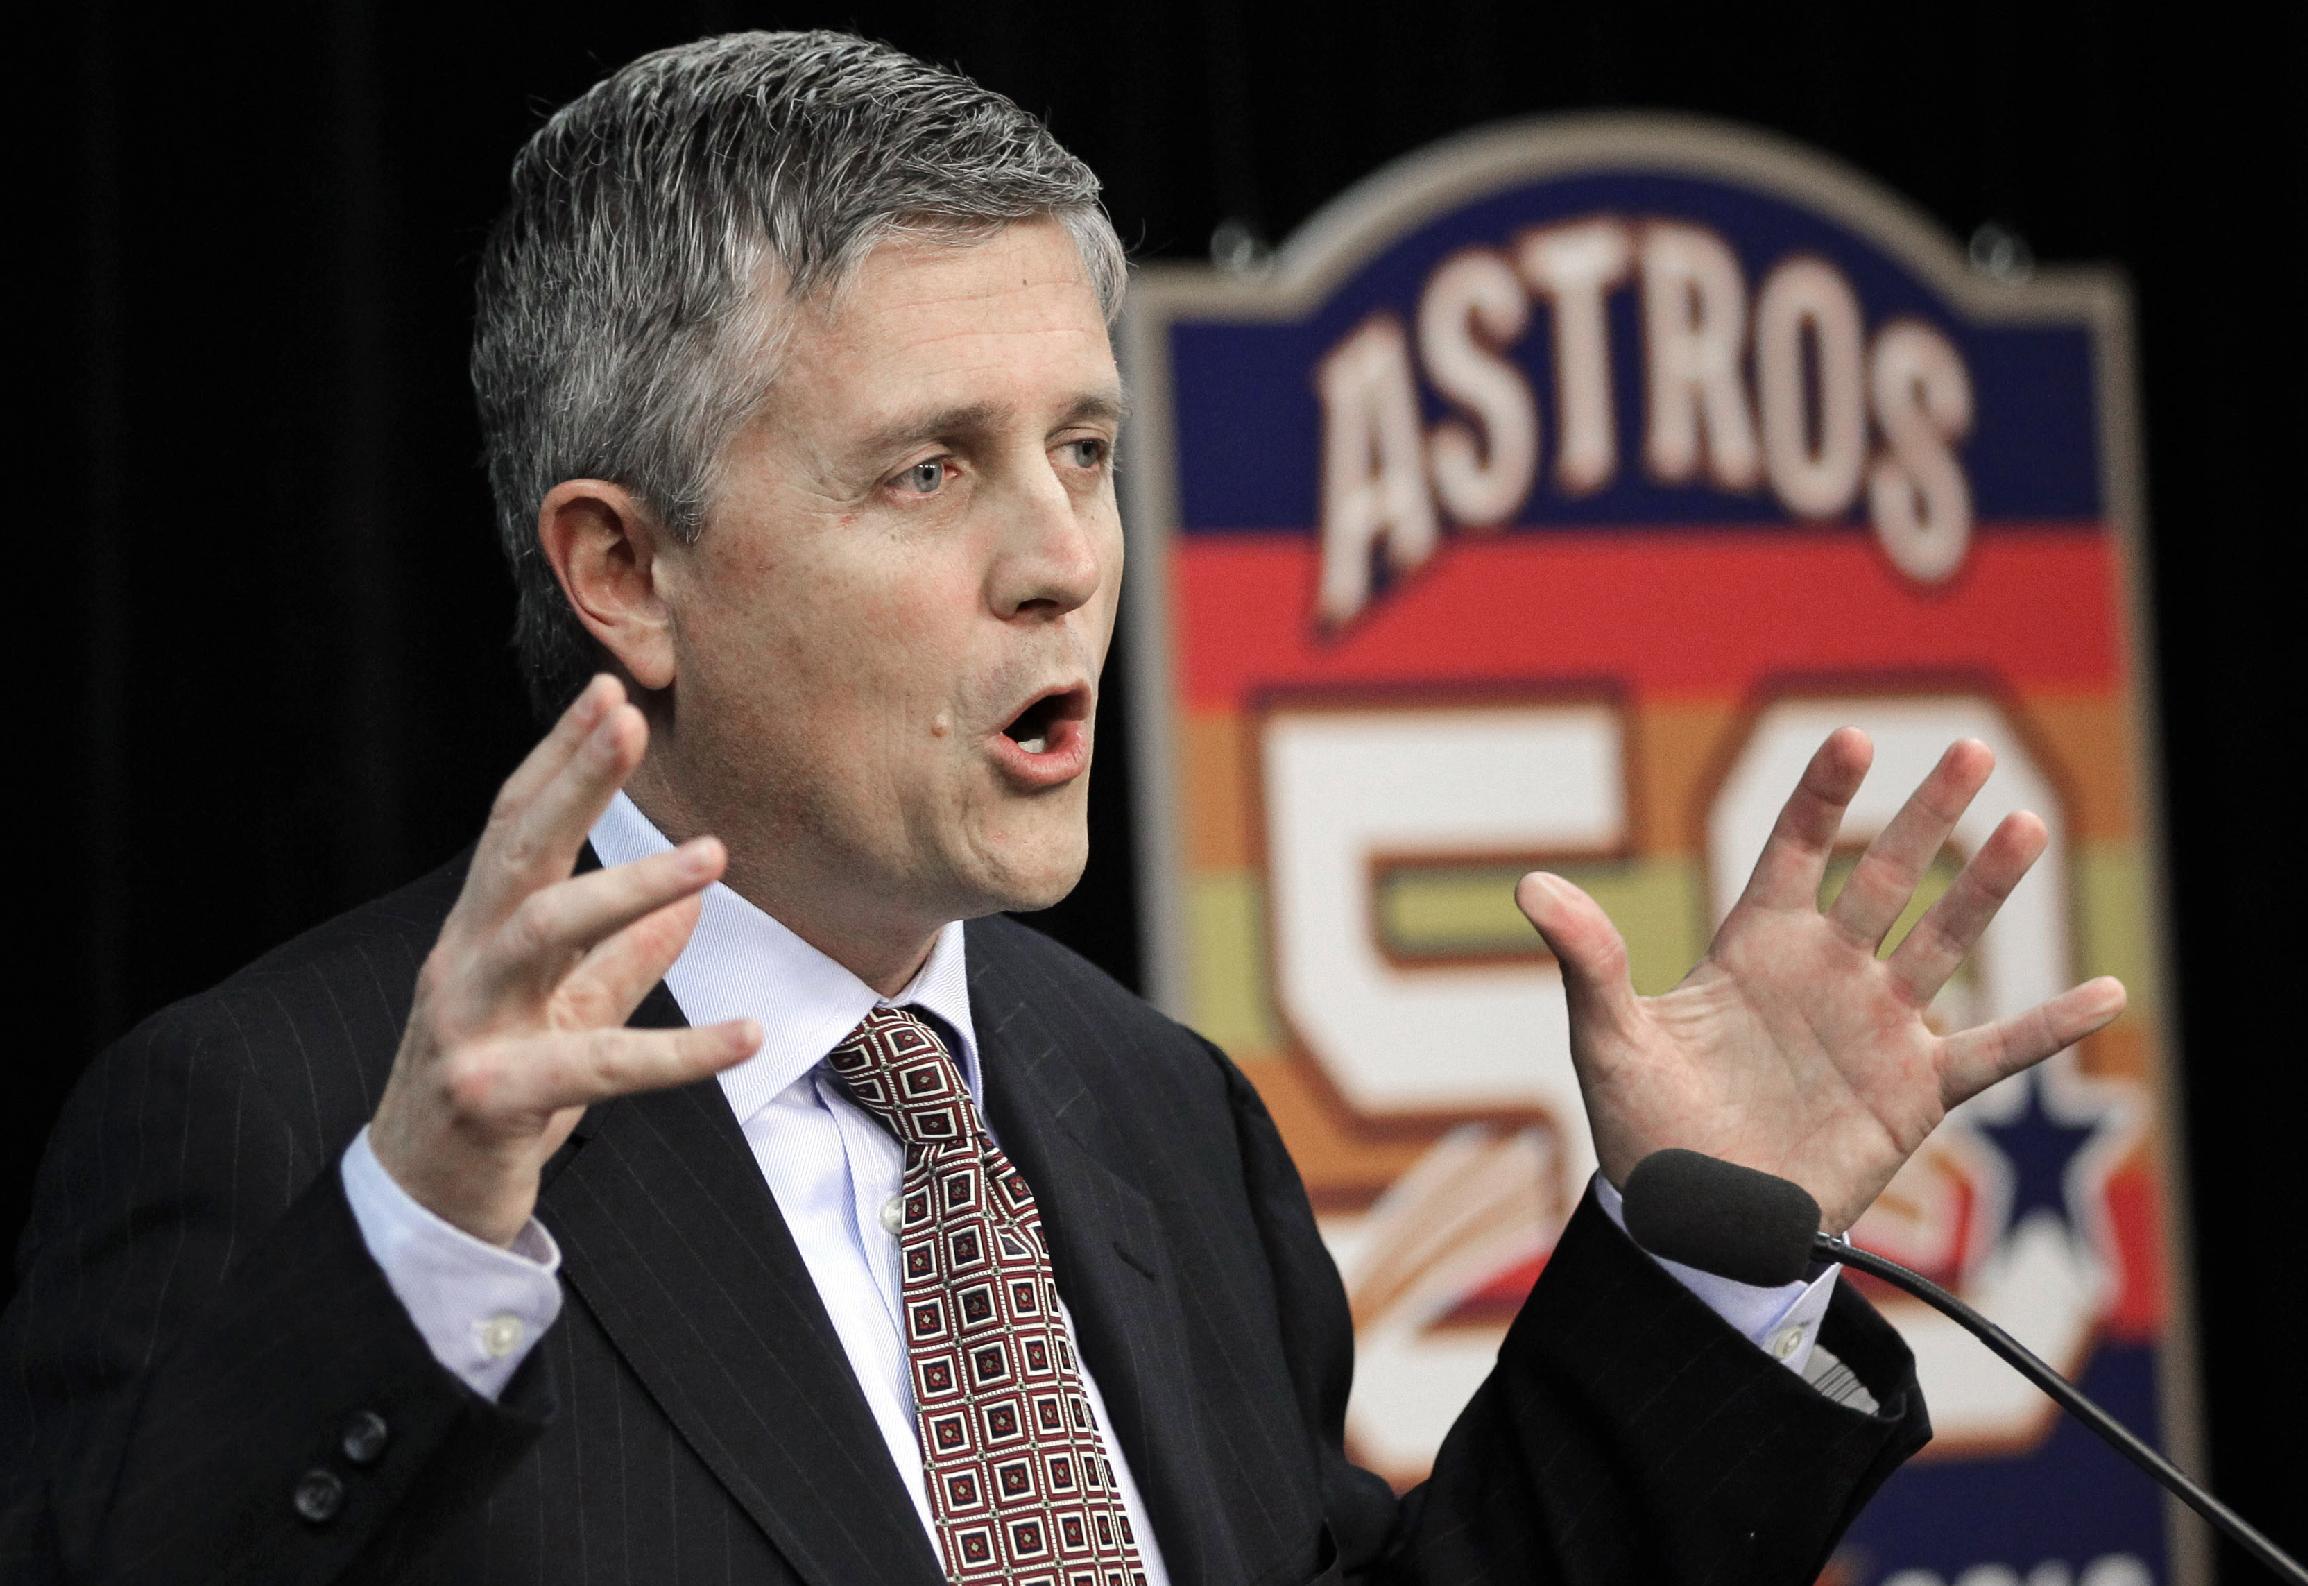 Astros general manager Jeff Luhnow also served as a Cardinals executive from 2003-2011. (AP)